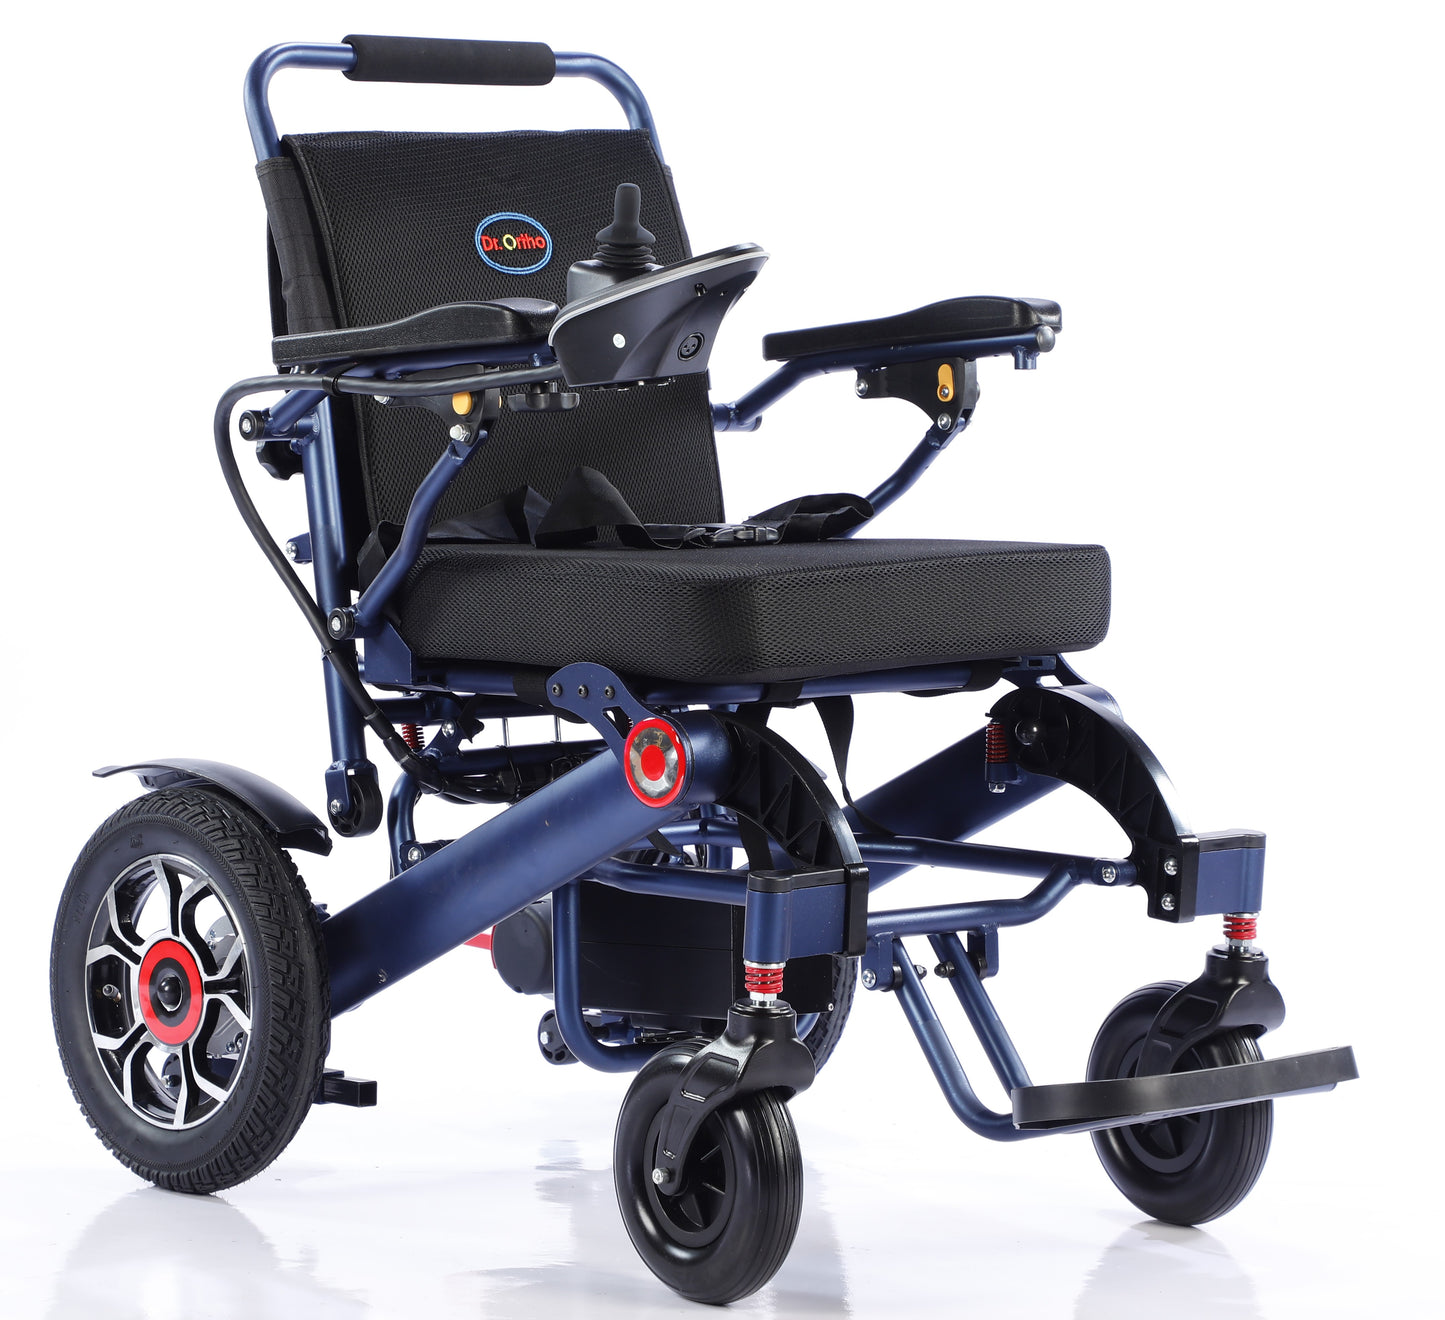 Dr.Ortho electric wheelchair DR-N-20-D blue frame light weight aluminum frame with lithium battery motor 250W